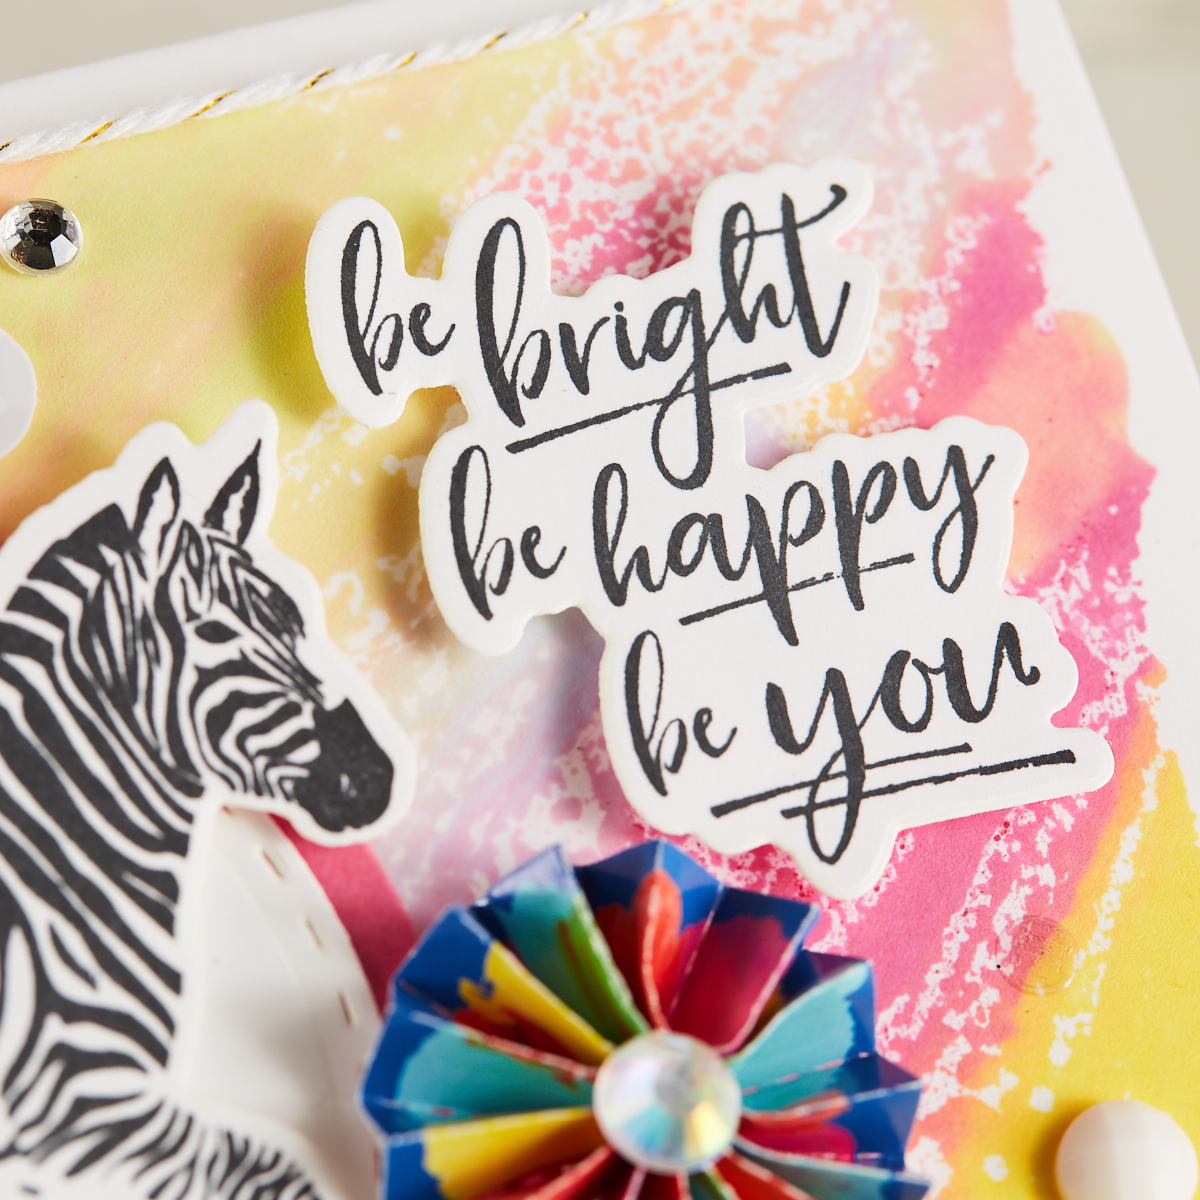 closeup of zebra card that says Be Bright, Be Happy, Be You, by Mariana Grigsby with watercolor background and rubber stamped zebra